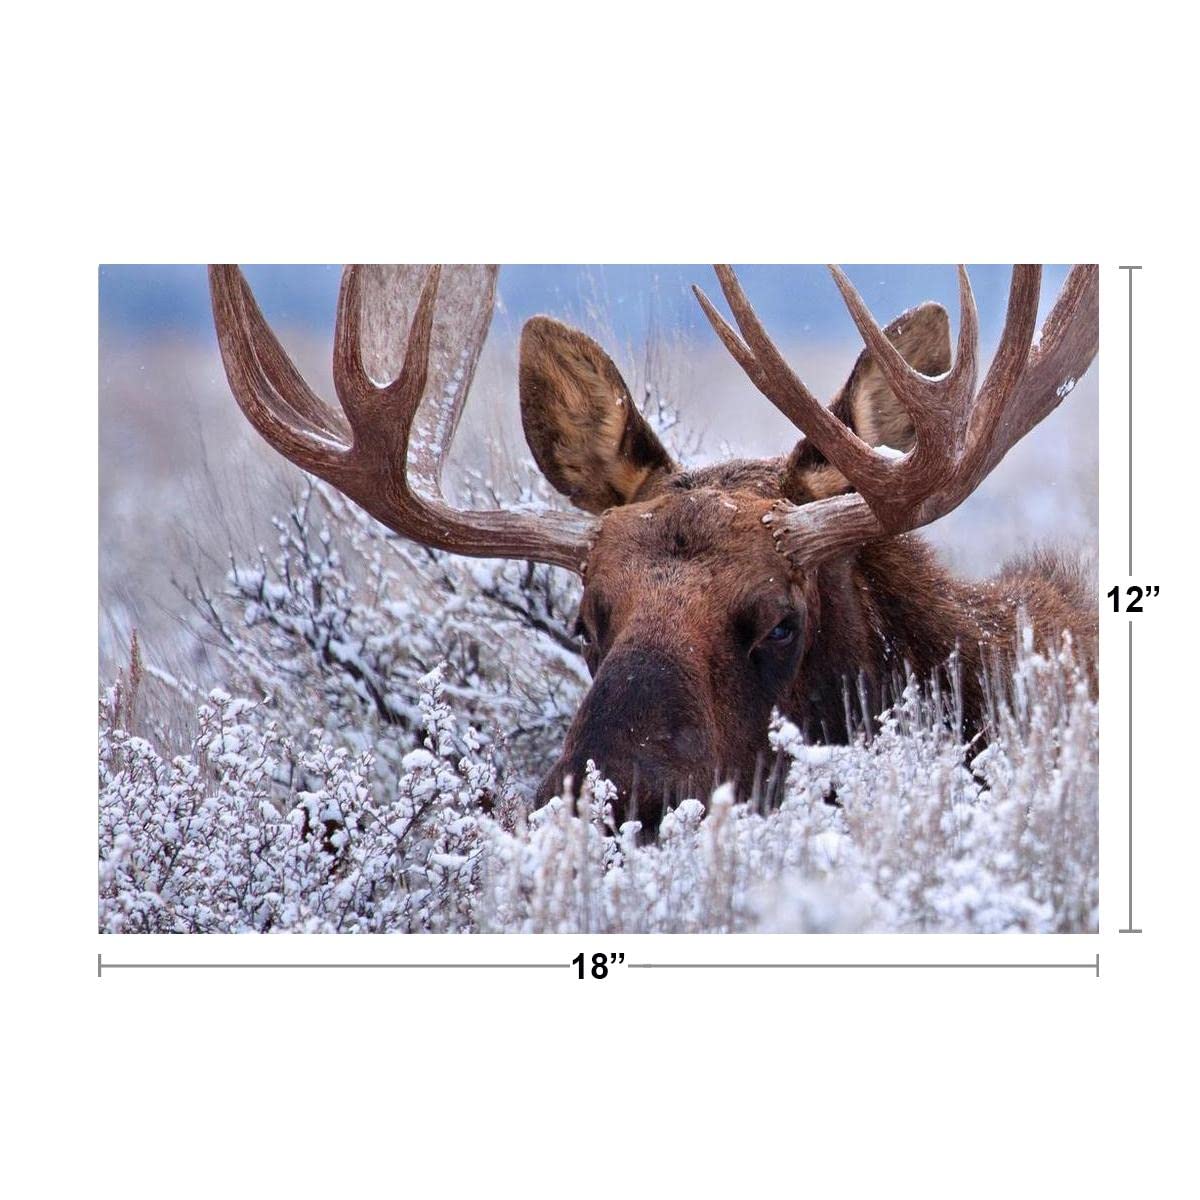 Hidden Moose Large Antlers Rack Bull Moose Hiding in Snow Dusted Sagebrush Wild Animal Nature Photo Photograph Cool Wall Decor Art Print Poster 18x12